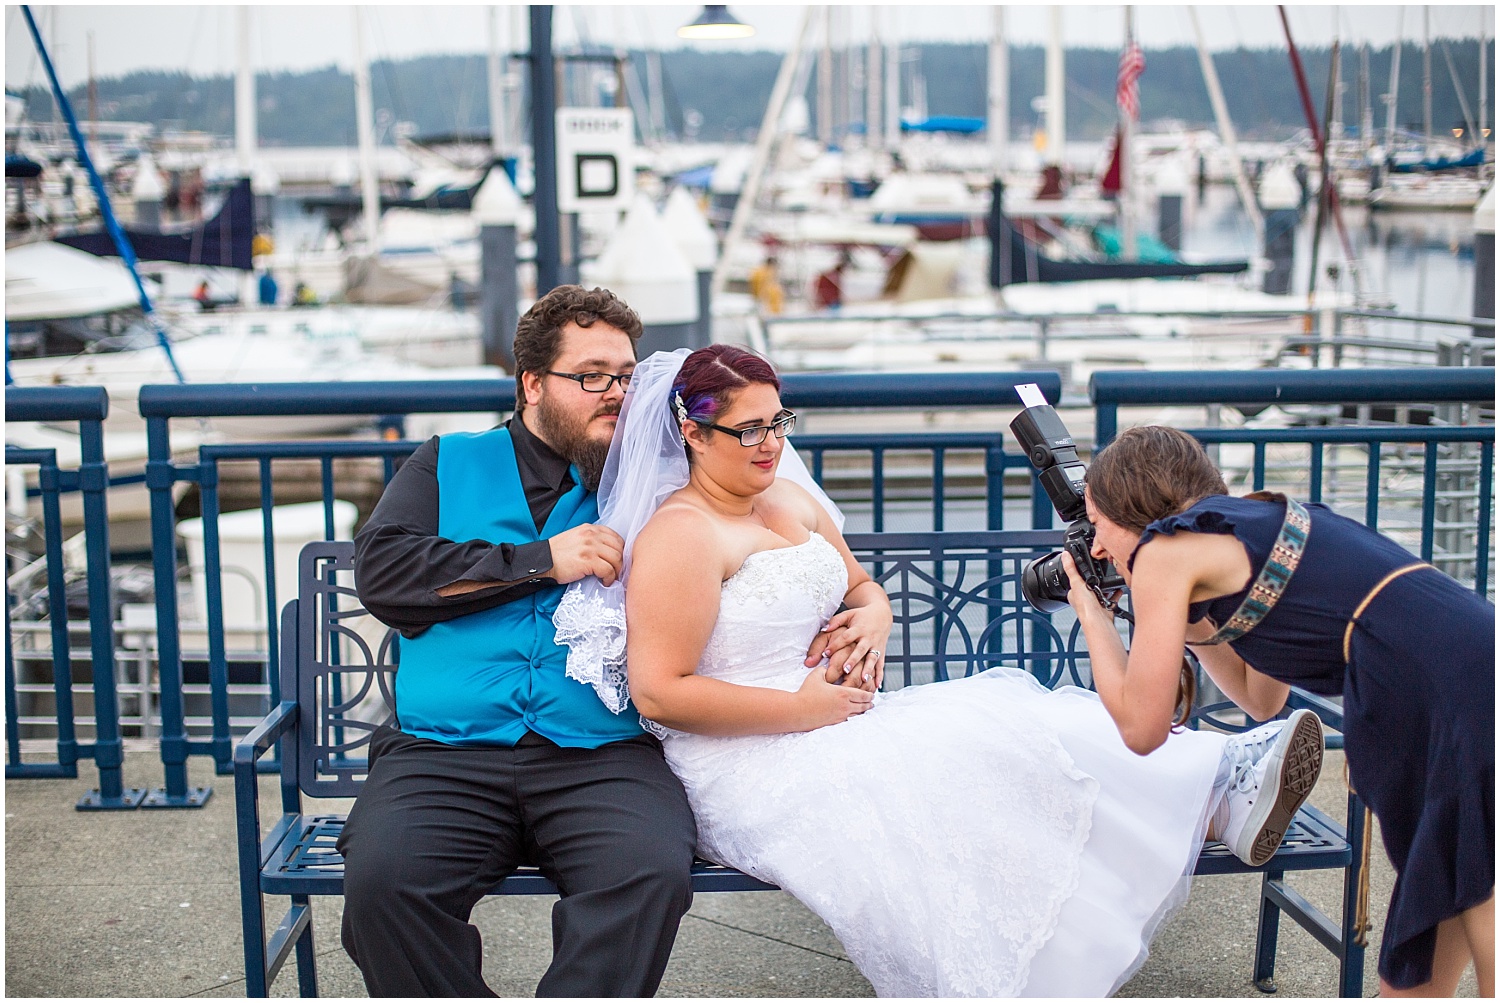 Why I became a wedding photographer: DBK Photography